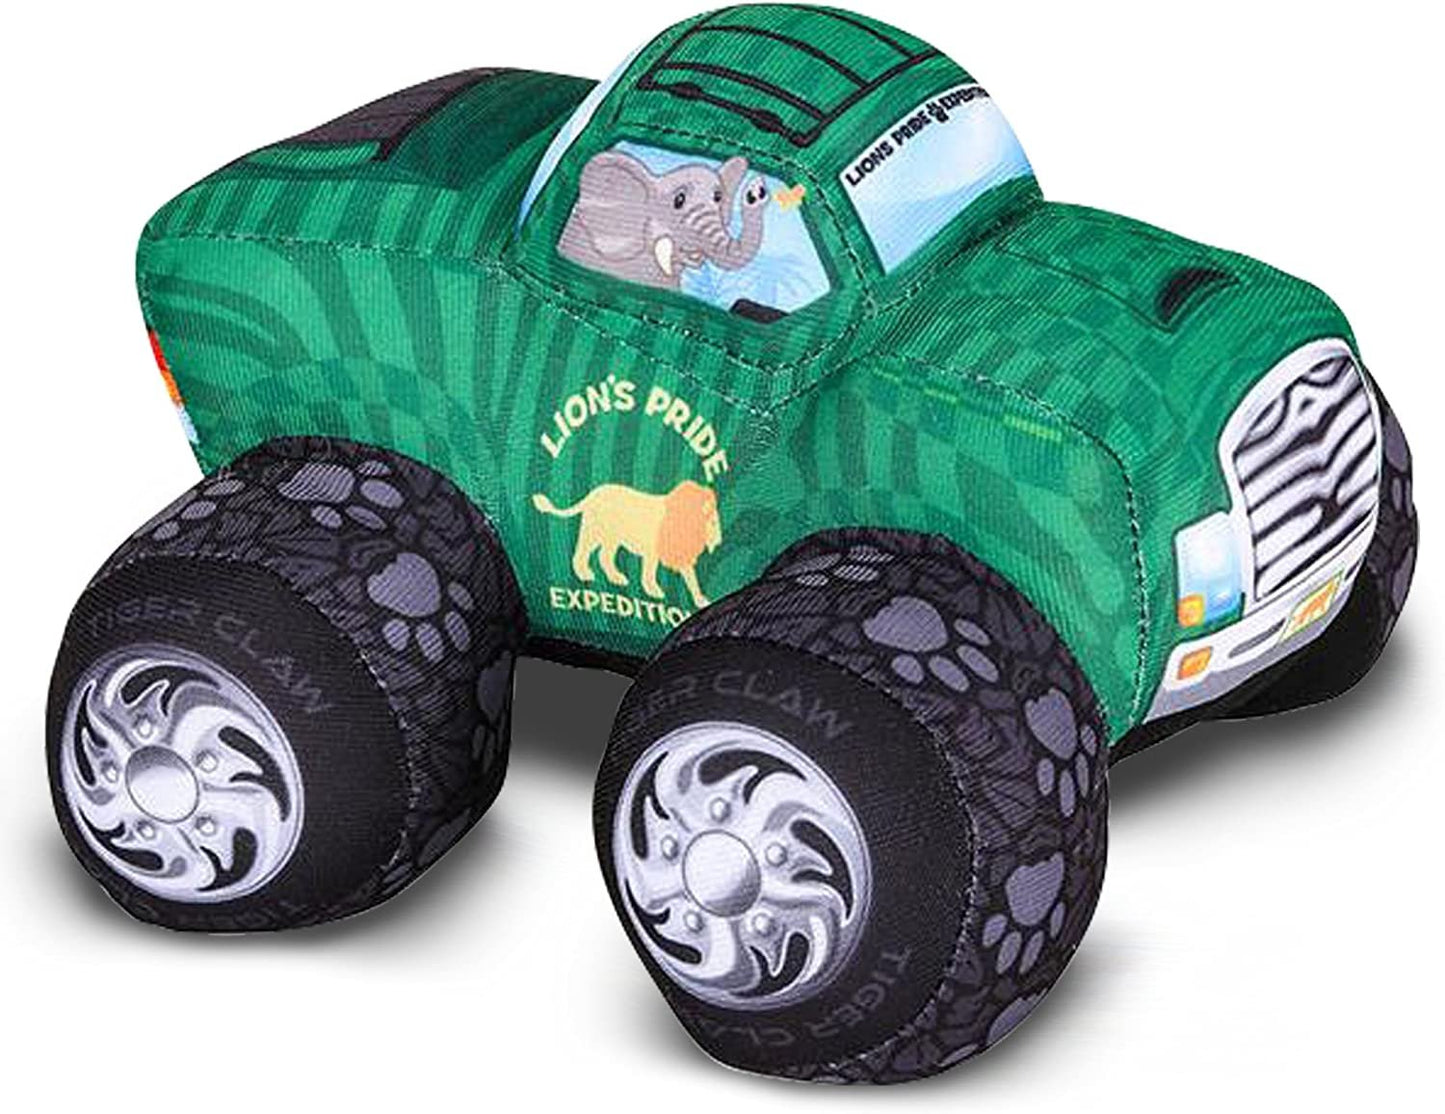 ArtCreativity Plush Monster Truck Safari Design - 8 Inch Big Stuffed Monster Truck - Cool Animal-Themed Design - Soft and Cuddly Toys for Little Boys, Girls, Baby, Toddlers - Great Gift Idea